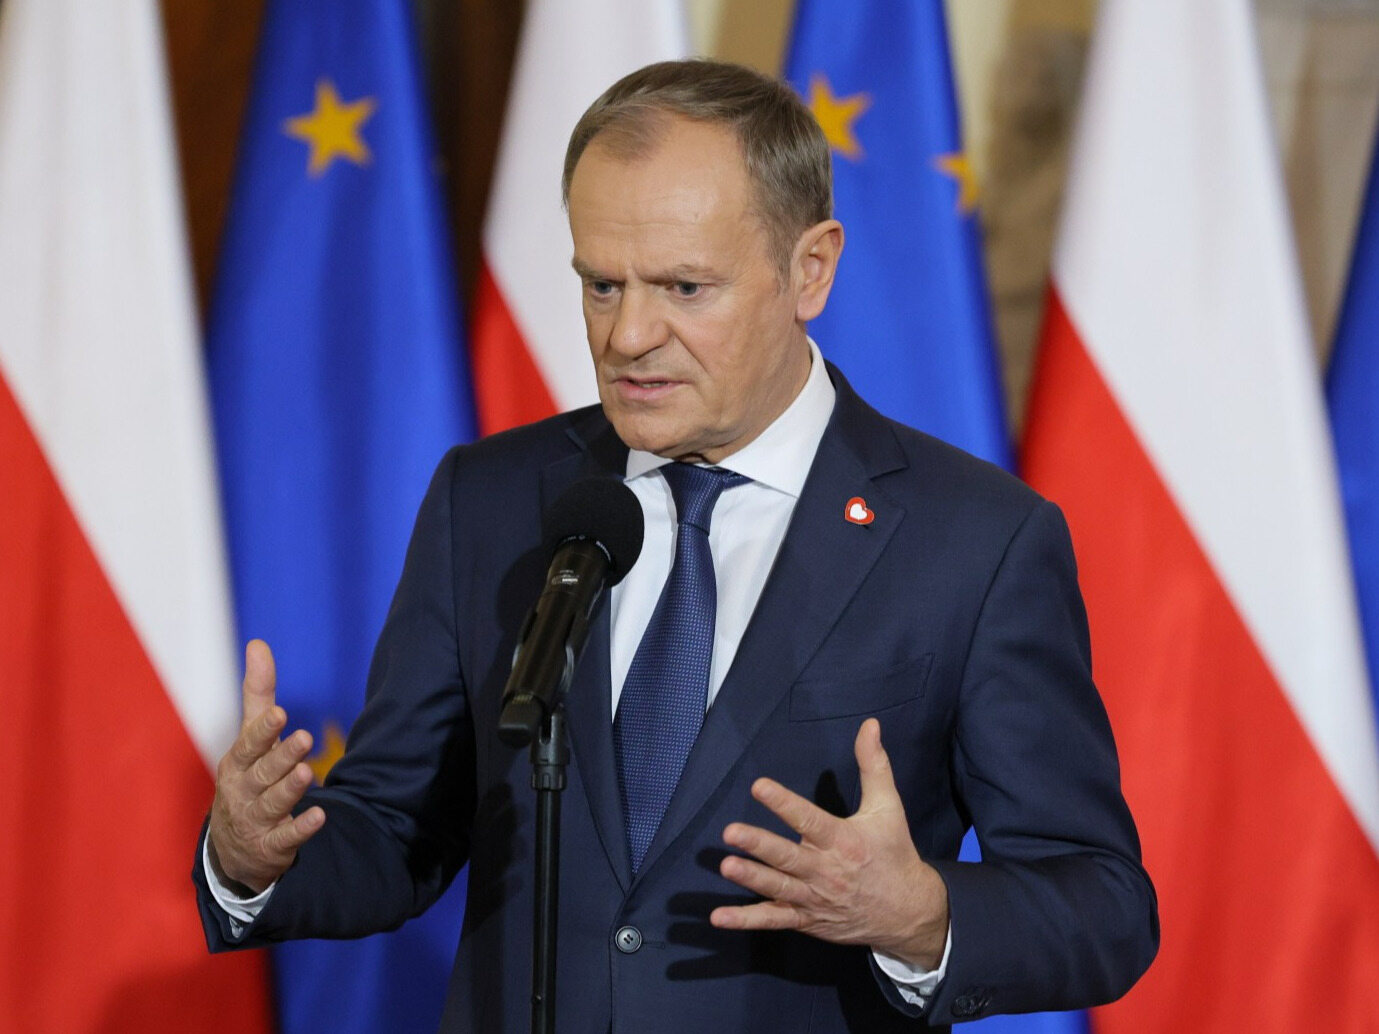 Tusk: I would like to protect NBP's independence from itself